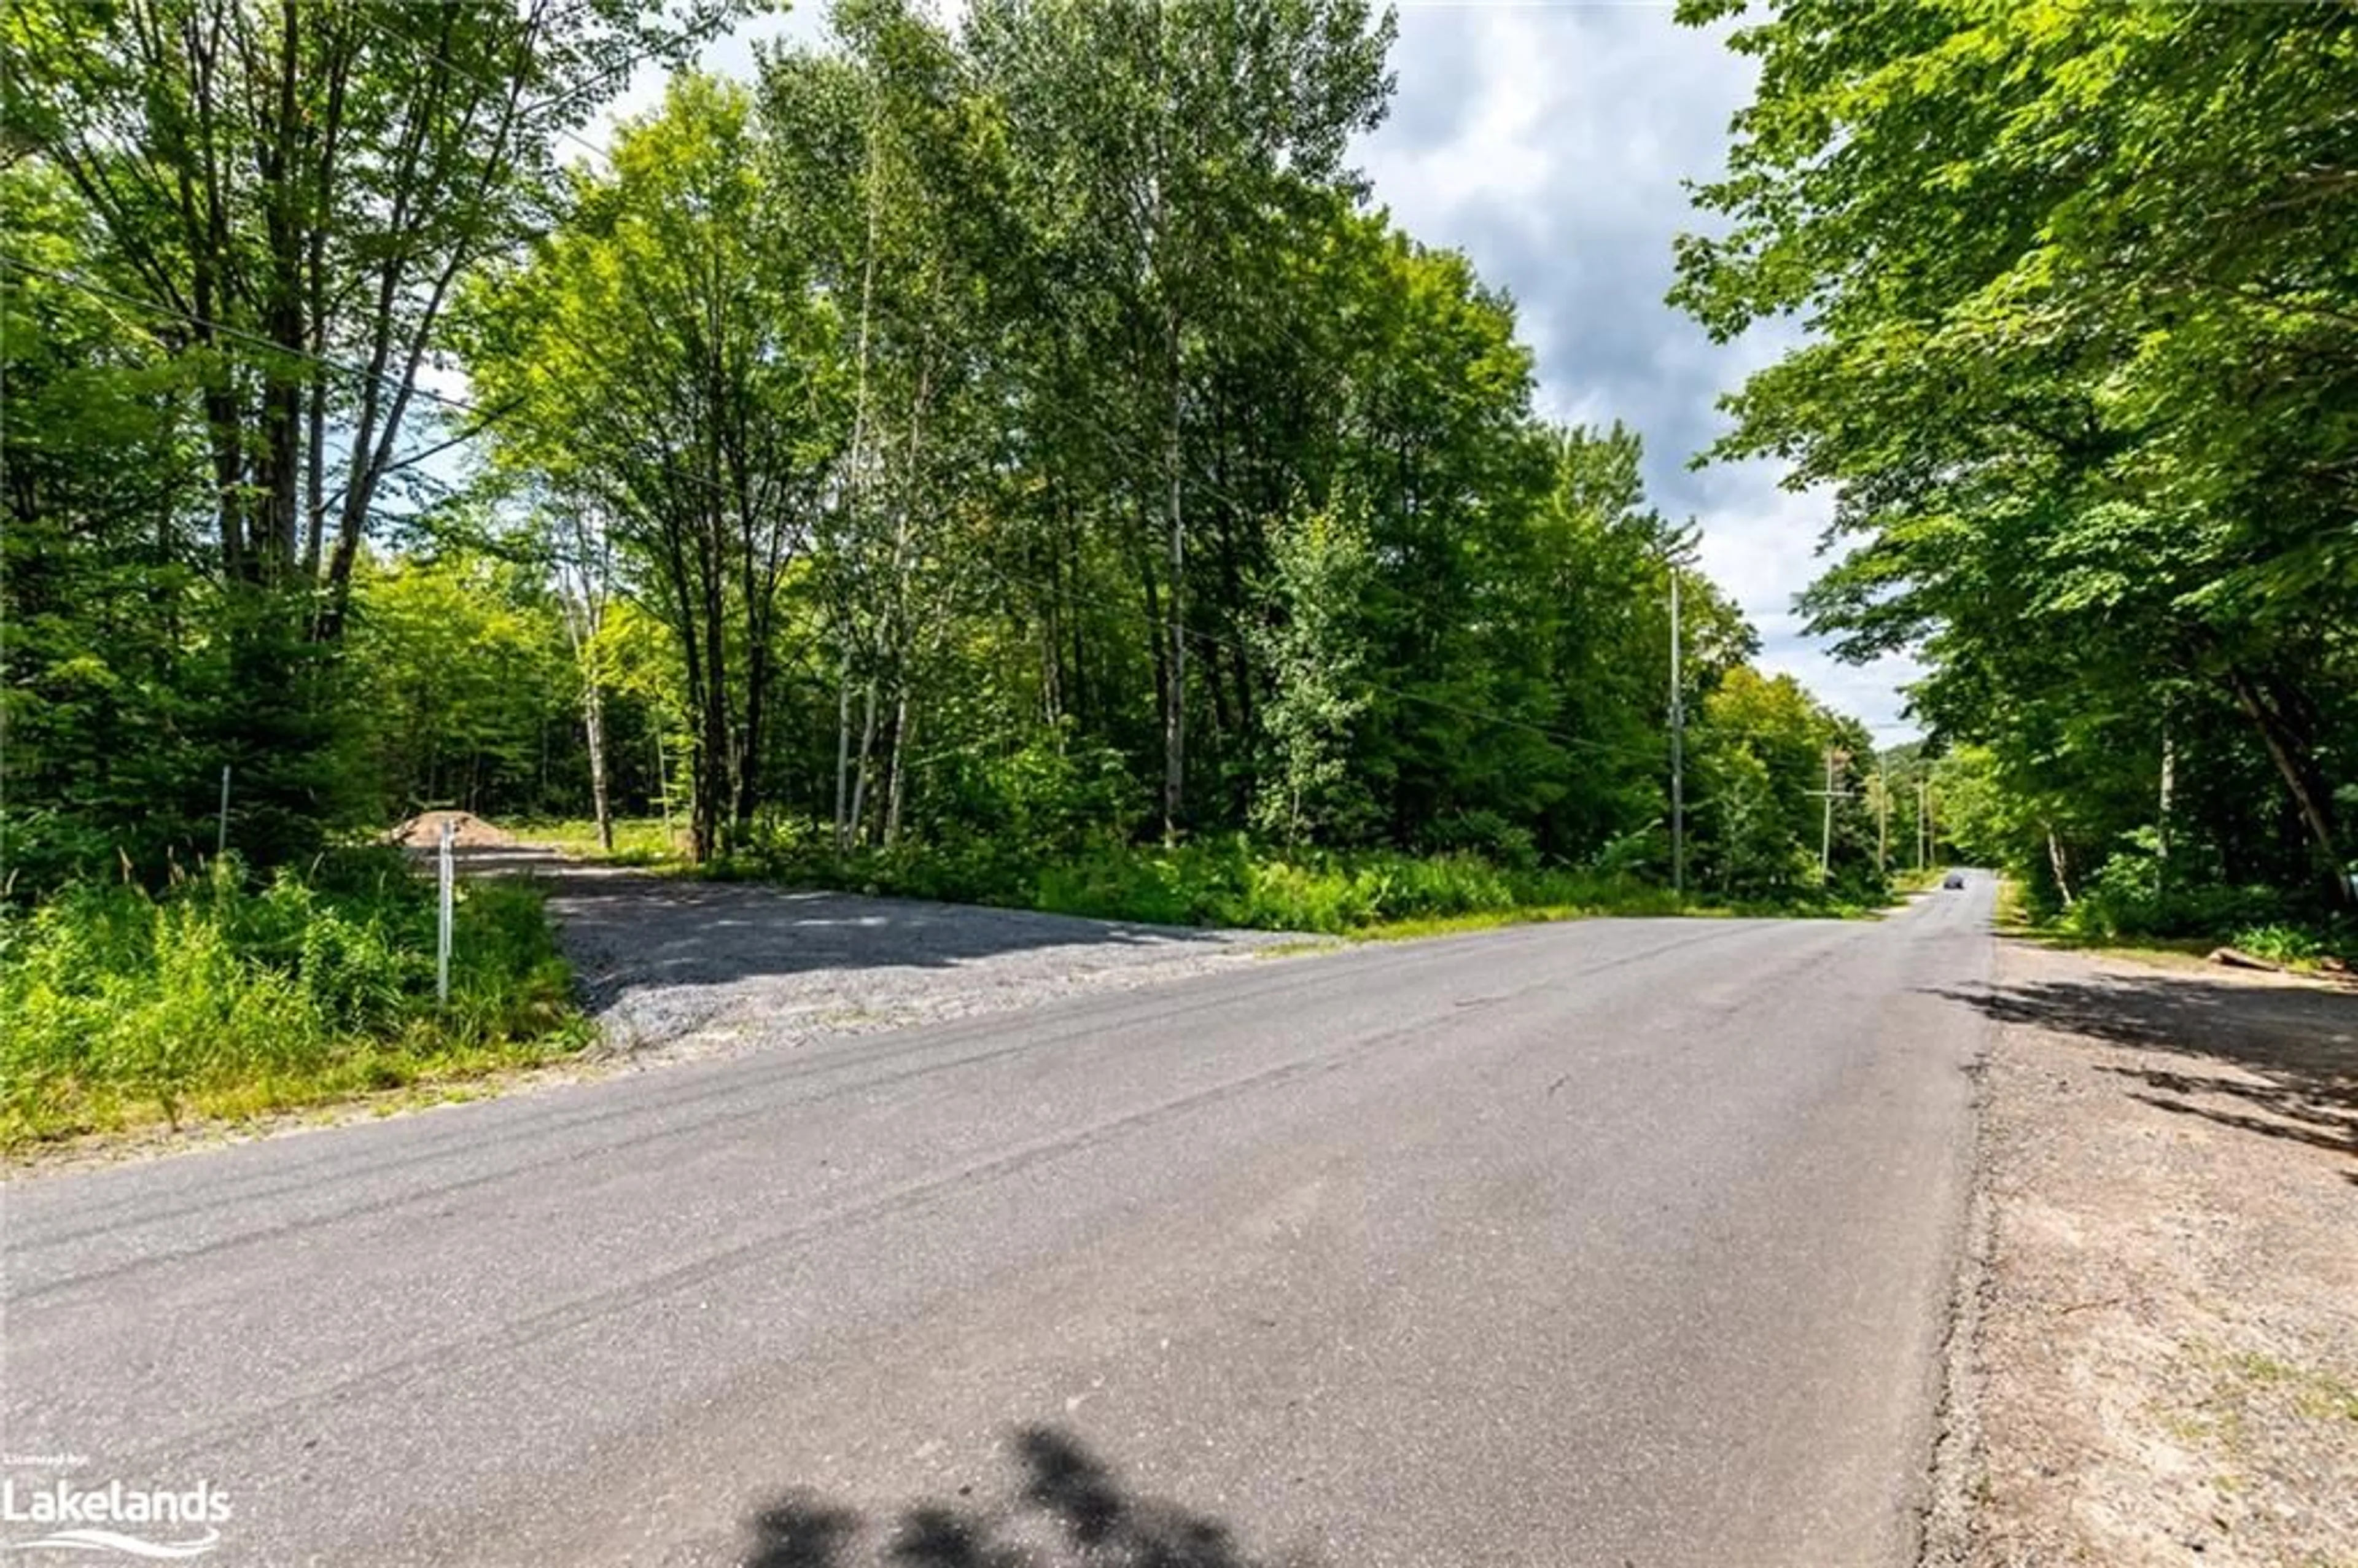 Street view for 1854 Old Muskoka Rd, Utterson Ontario P0B 1M0